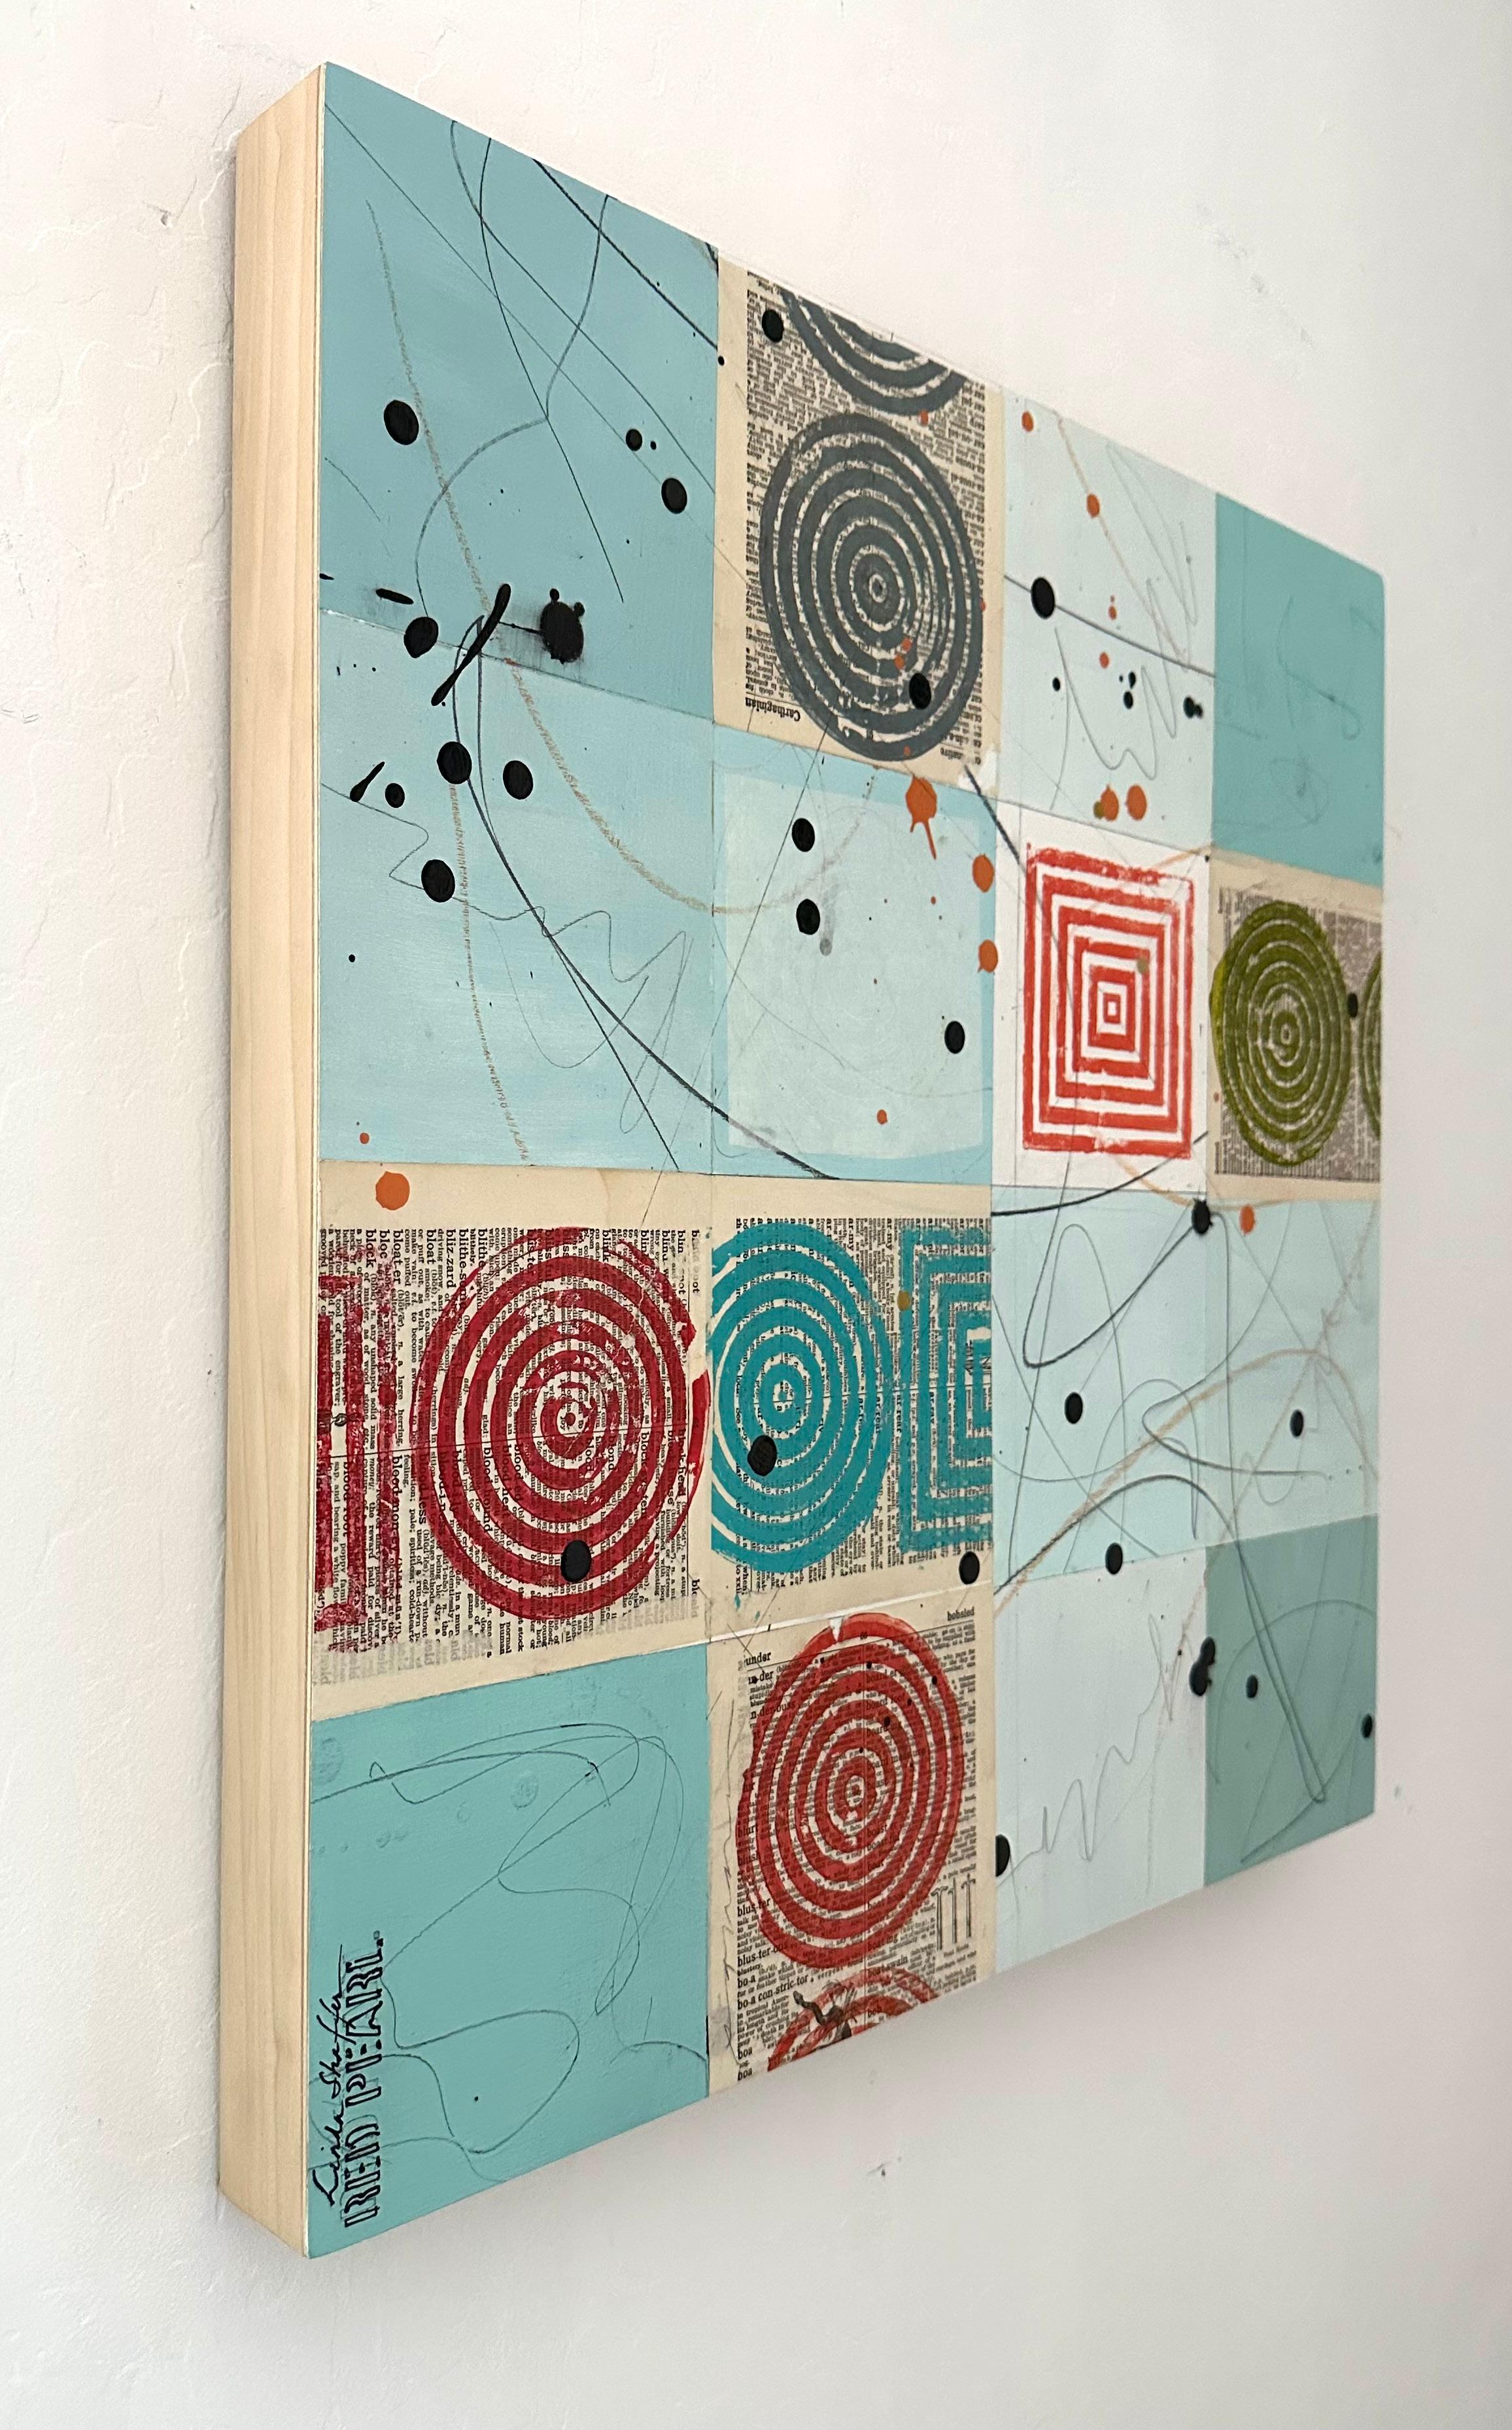 <p>Artist Comments<br>A multi-layered mixed media abstract unfolds in teal, black, and red. In creating the piece, artist Linda Shaffer takes inspiration from her love of travel and the exploration of possibilities in traversing through time. She